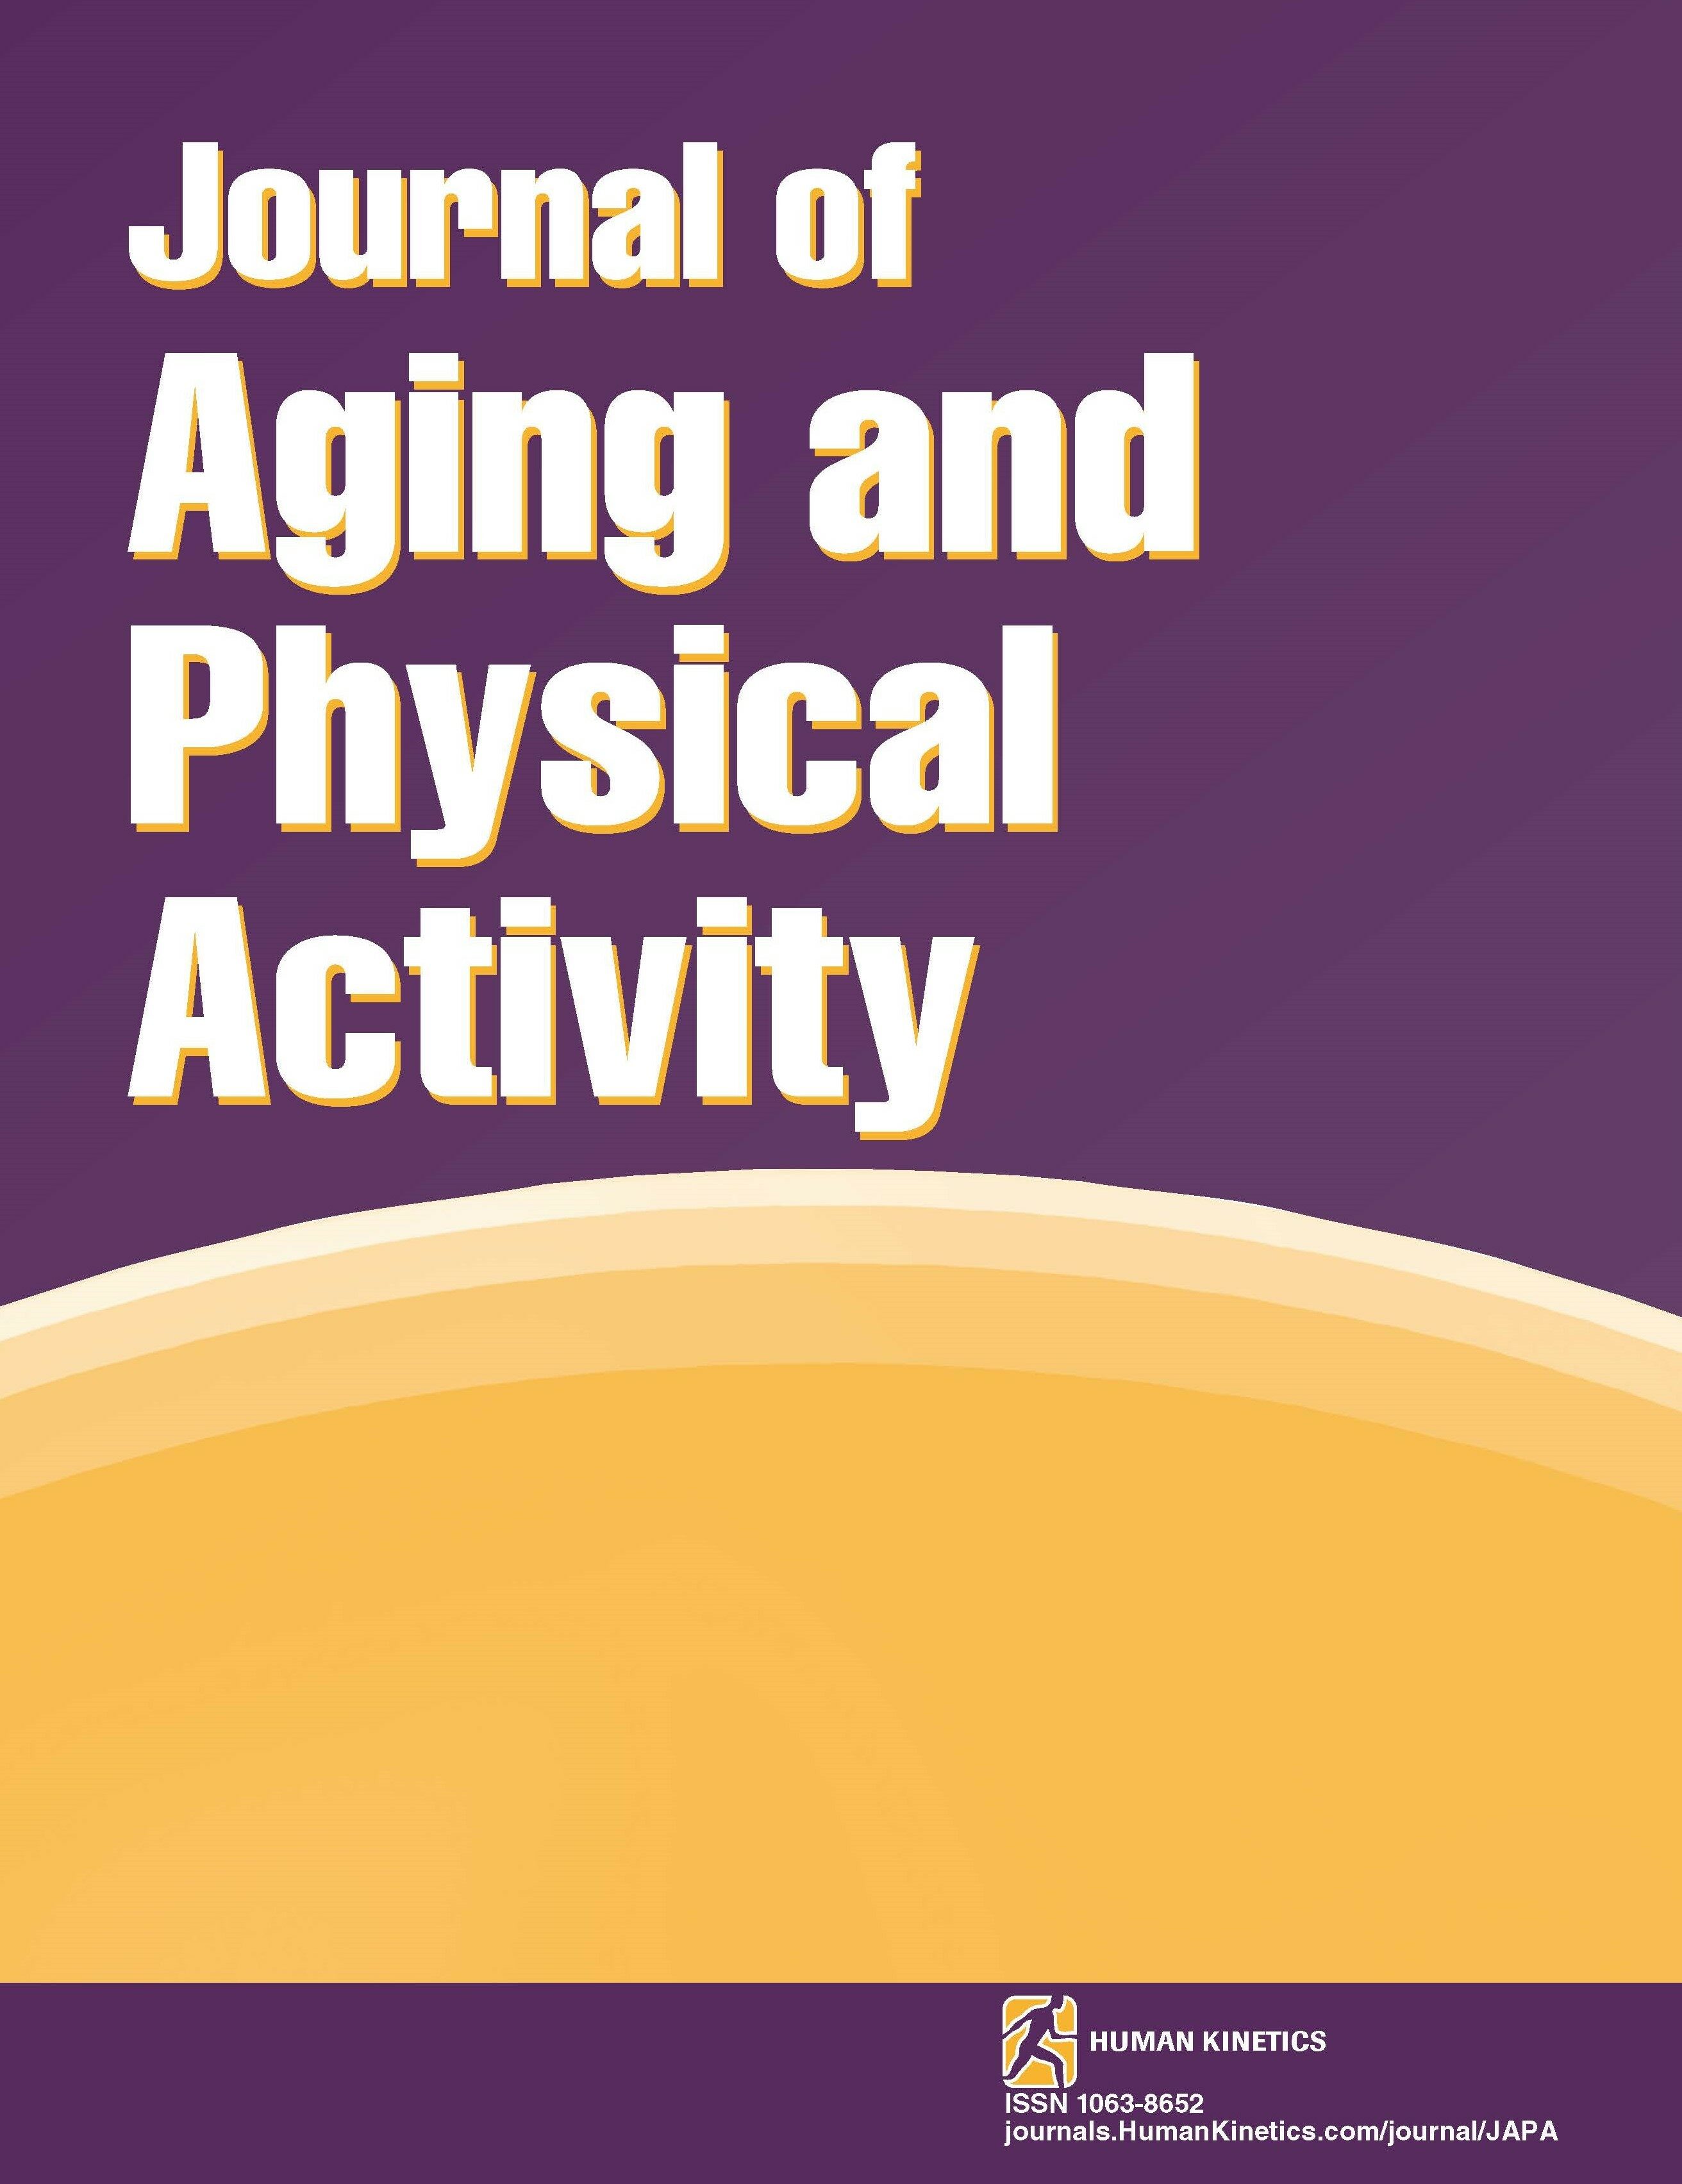 Does Role Identity Mediate the Influence of Motivational Regulations on Physical Activity Behavior Among People 55 Years or Older?